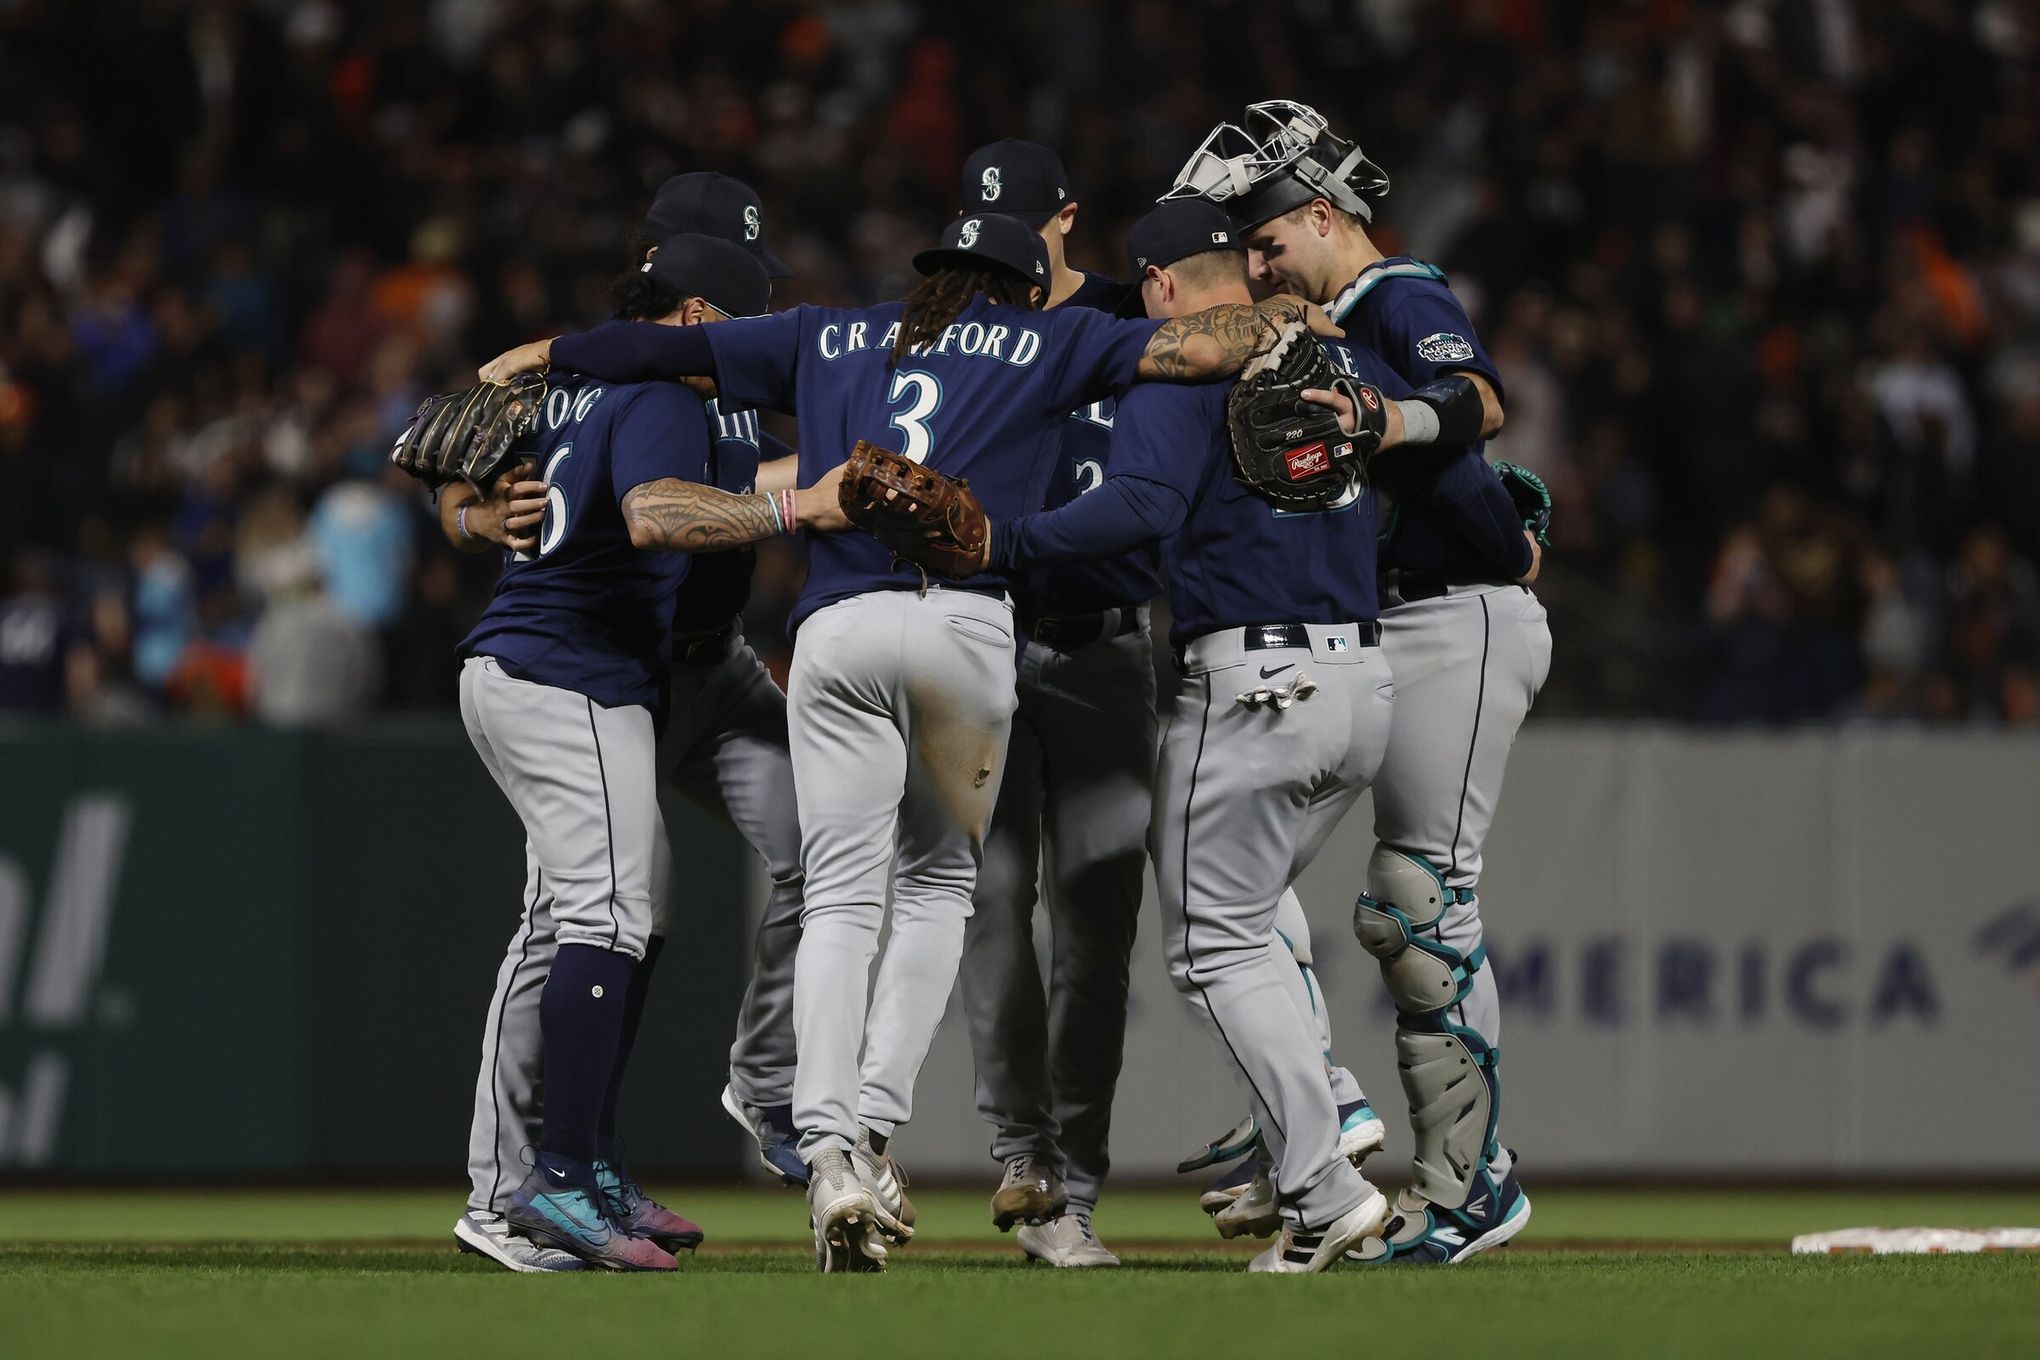 J.P. Crawford's 2-out hit in the ninth inning lifts Mariners past